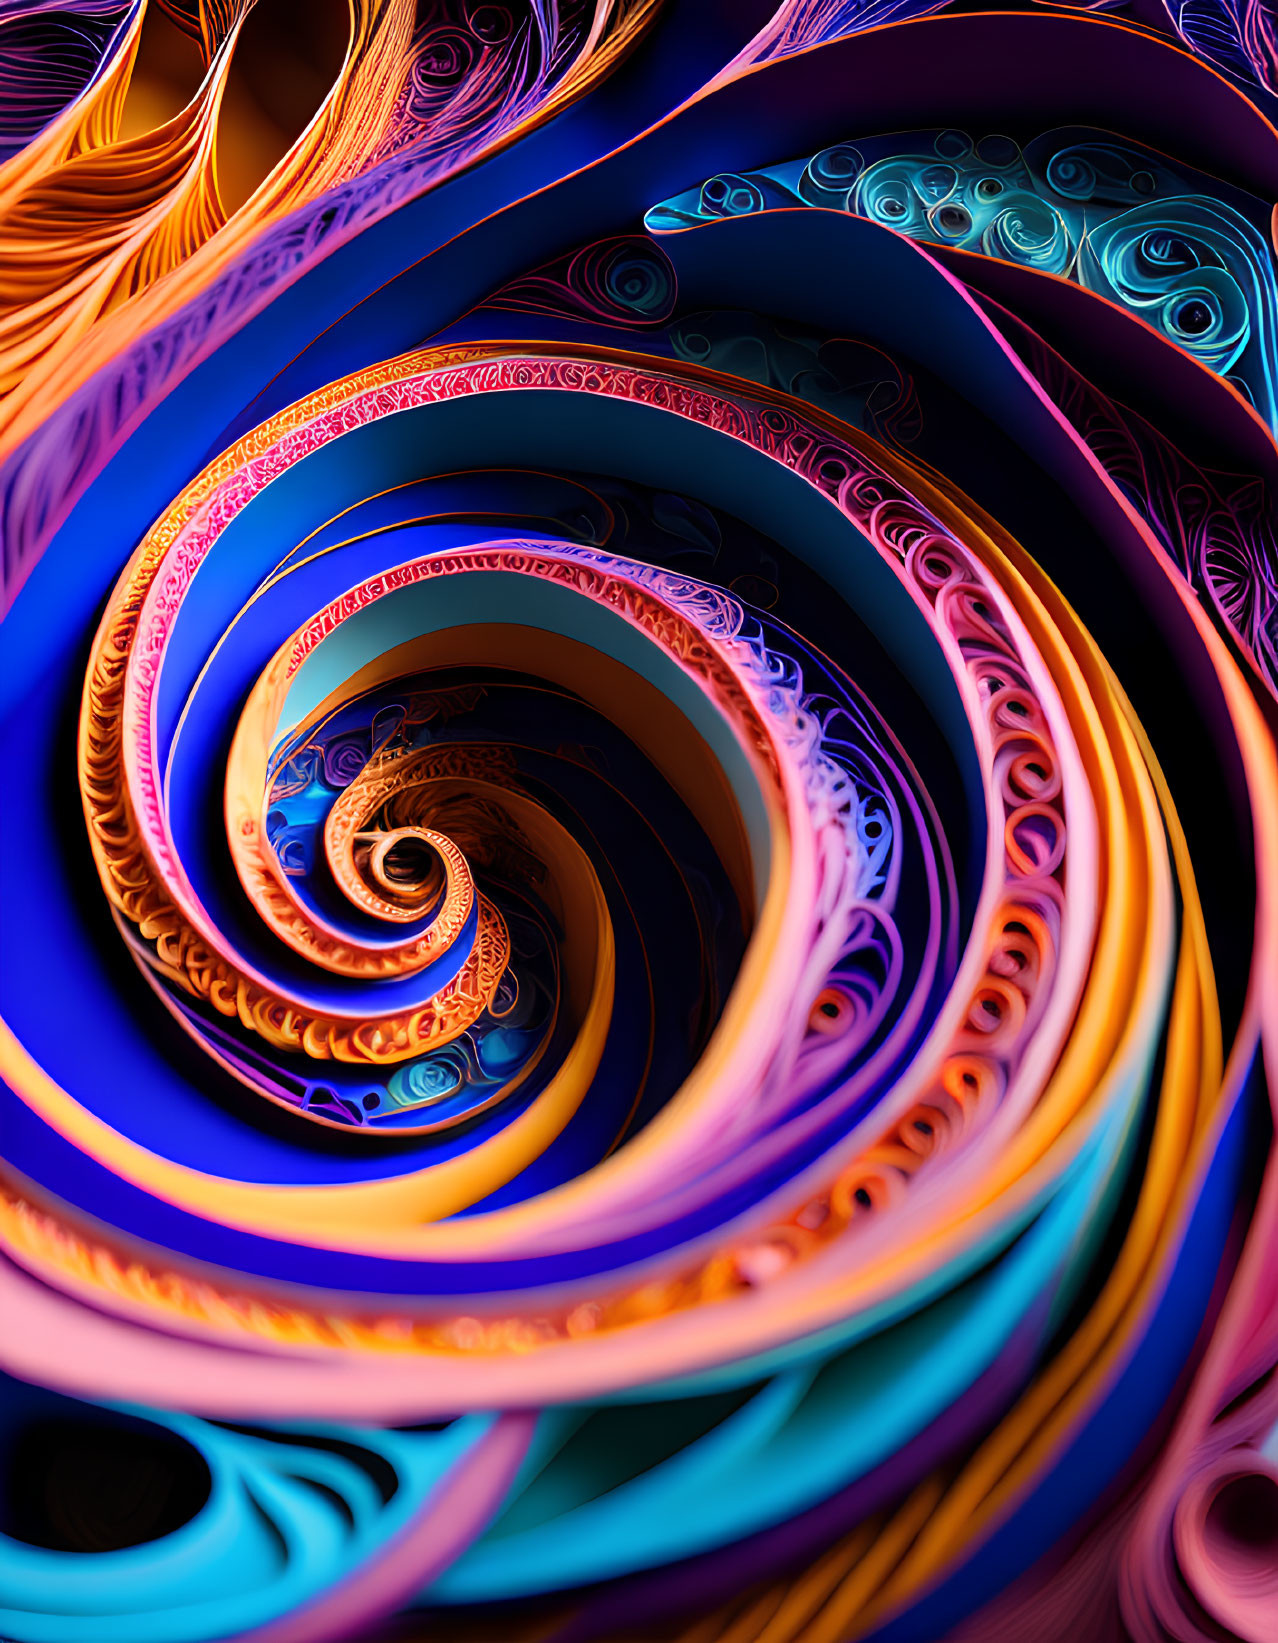 Colorful Spiral Paper Art with Quilling Technique in Orange, Yellow, and Blue